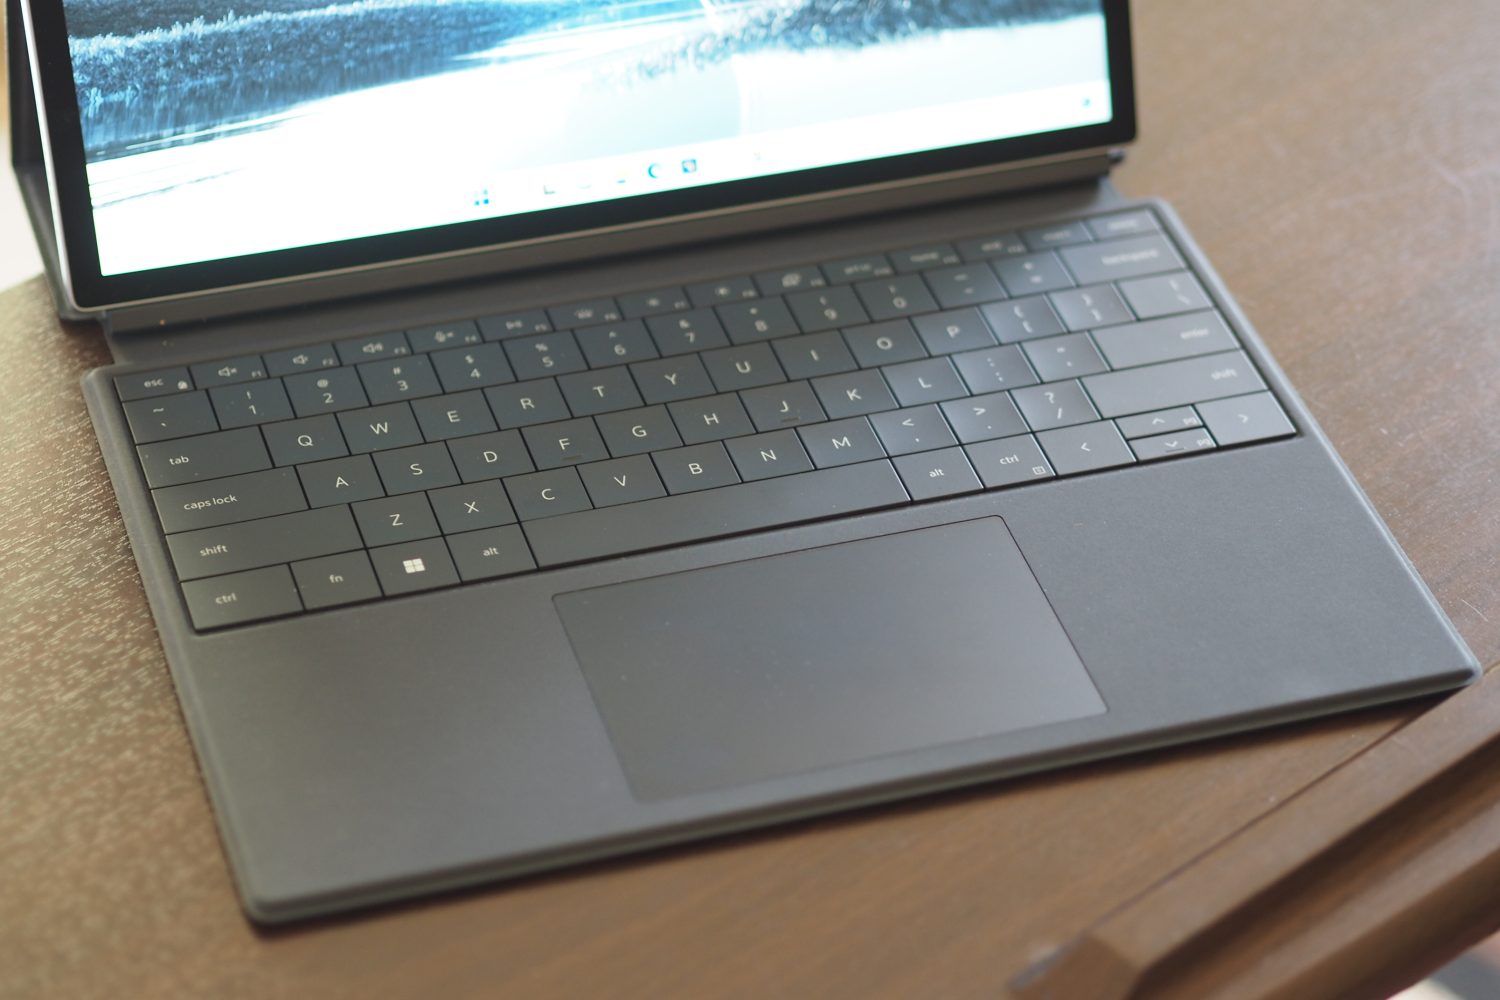 Dell XPS 13 2-in-1 top down view showing folio keyboard.